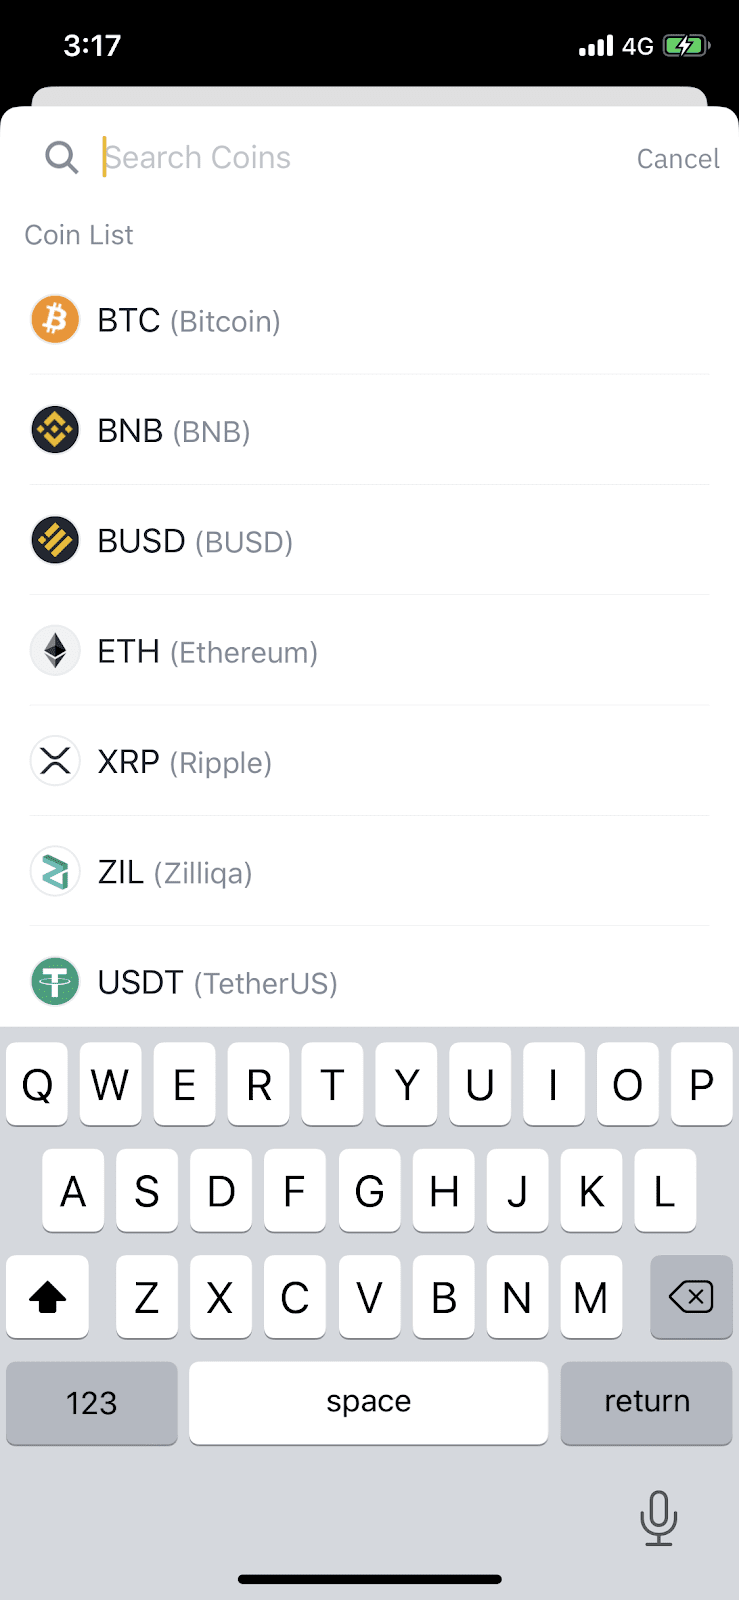 Binance Joins Ledger Live: Securely Buy 80+ Crypto With Credit Card | Ledger